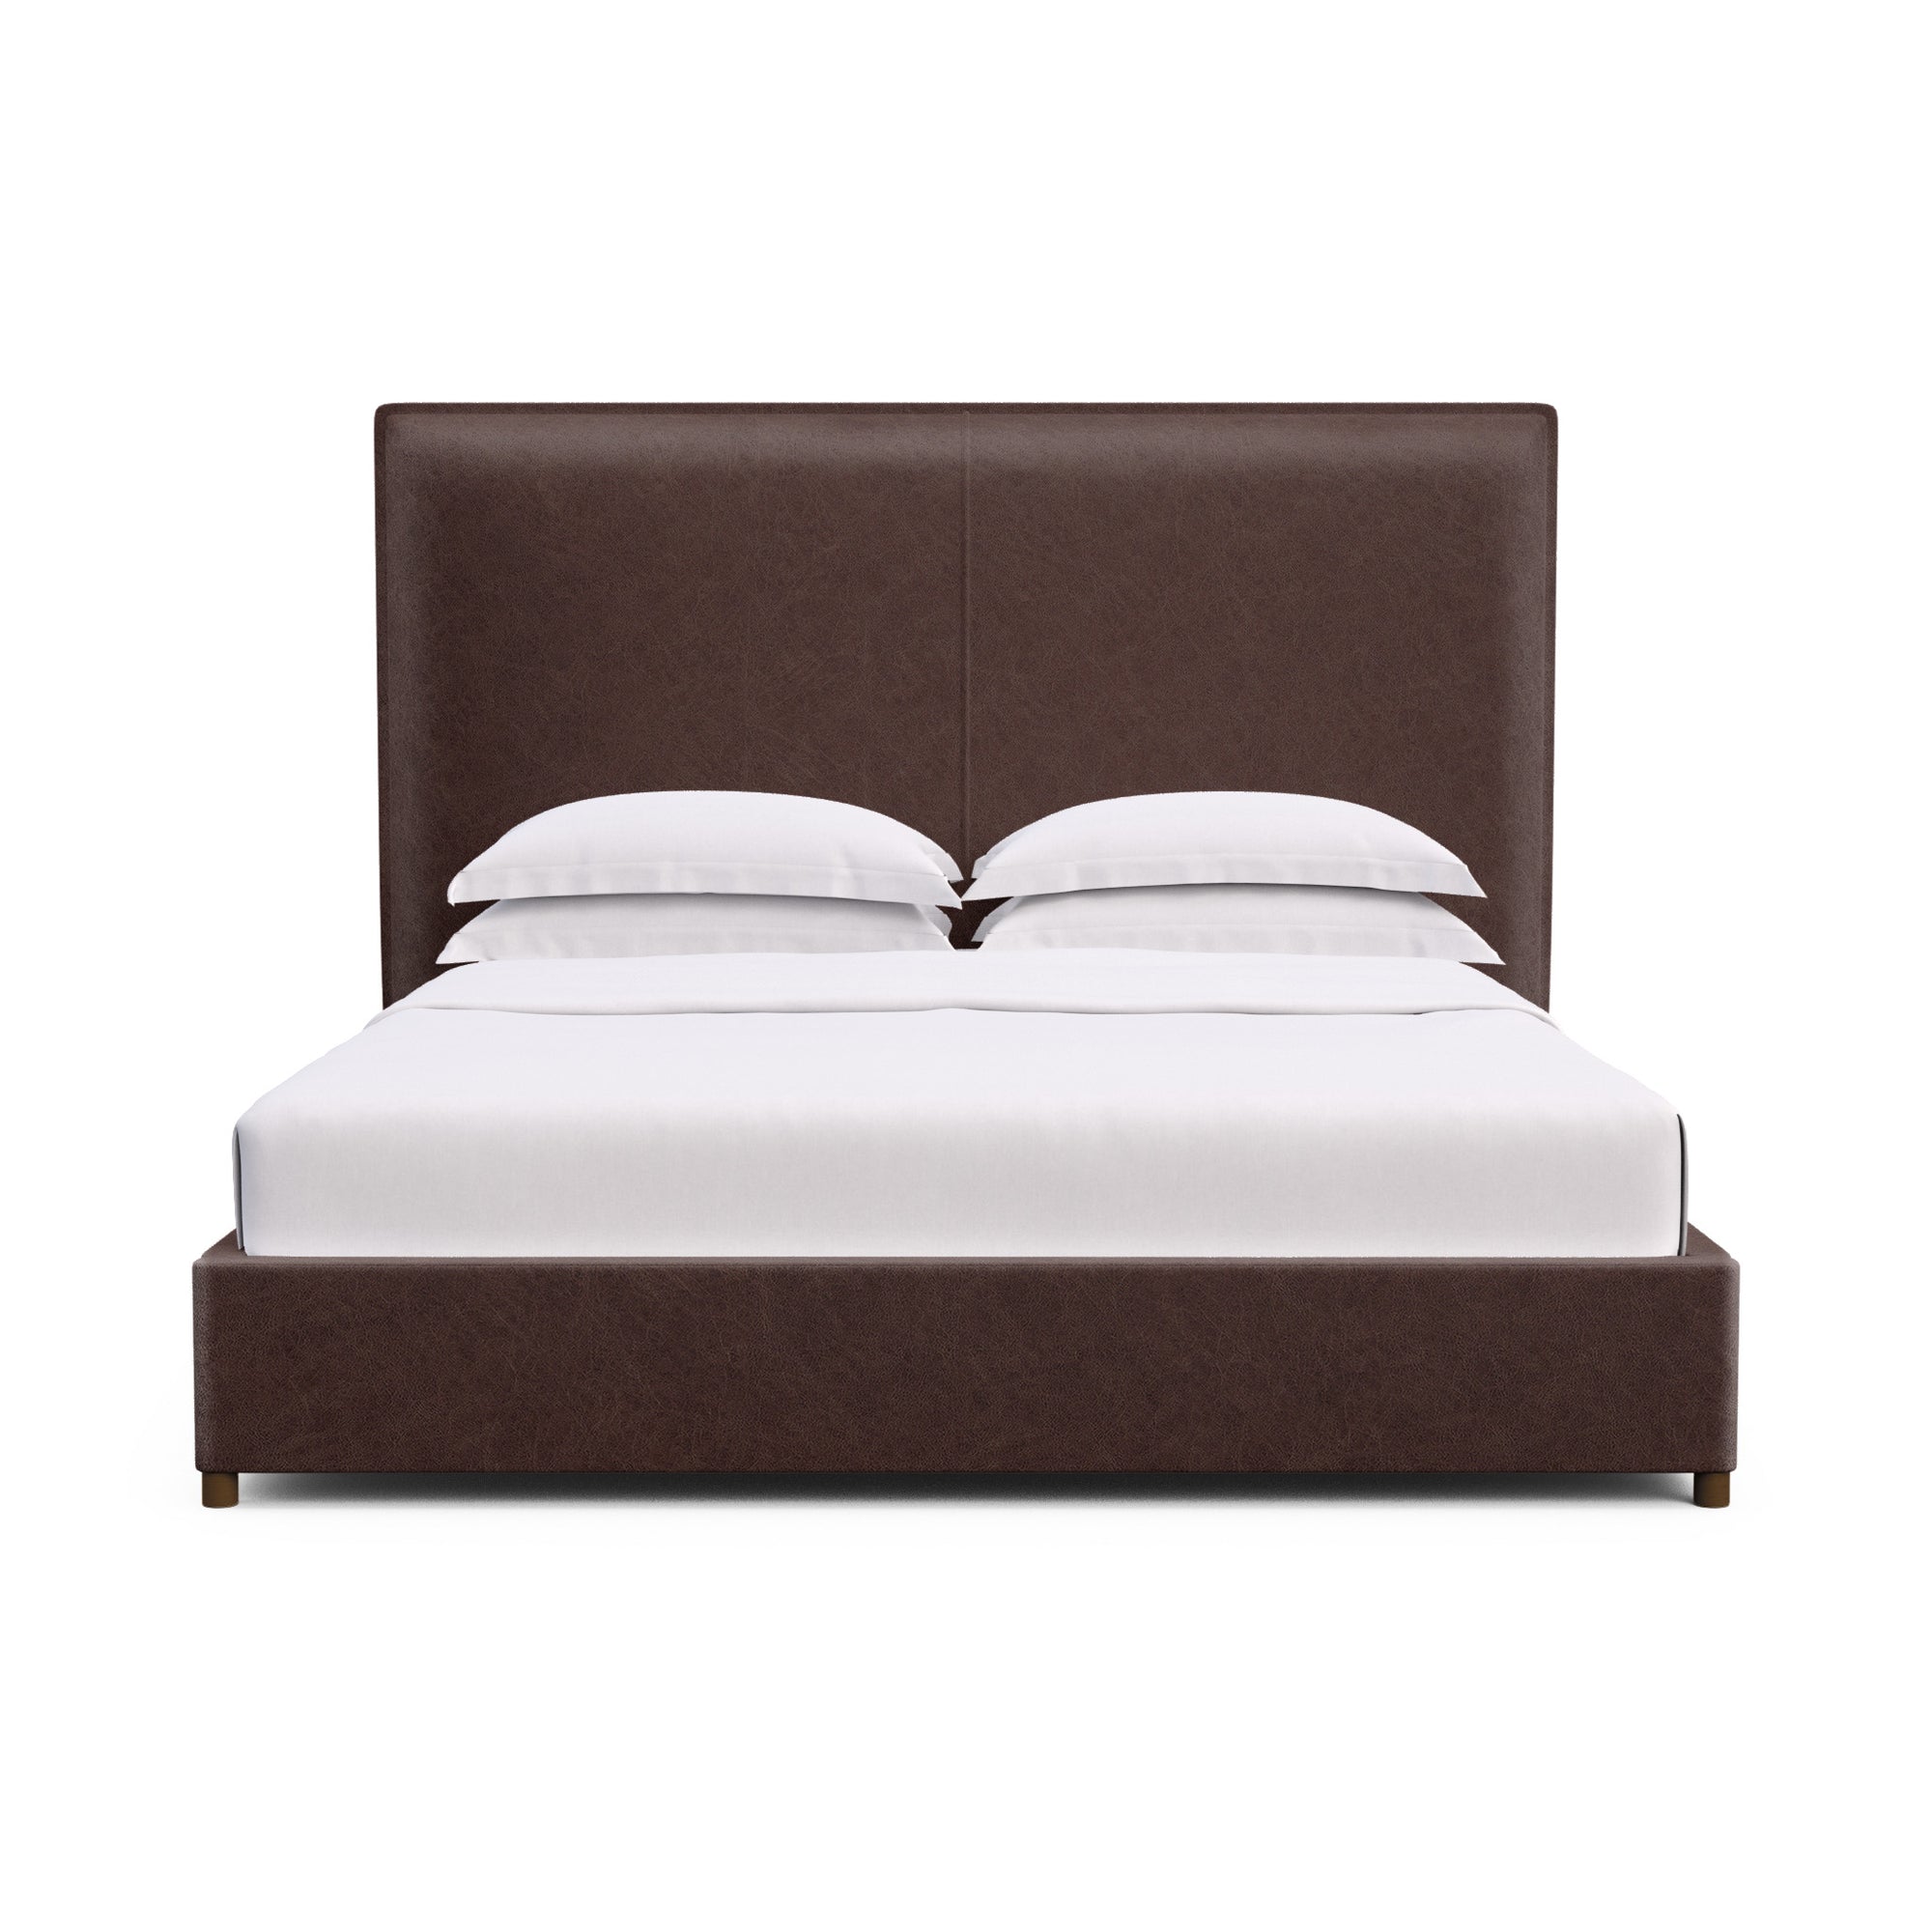 Mansfield Panel Bed - Chocolate Distressed Leather